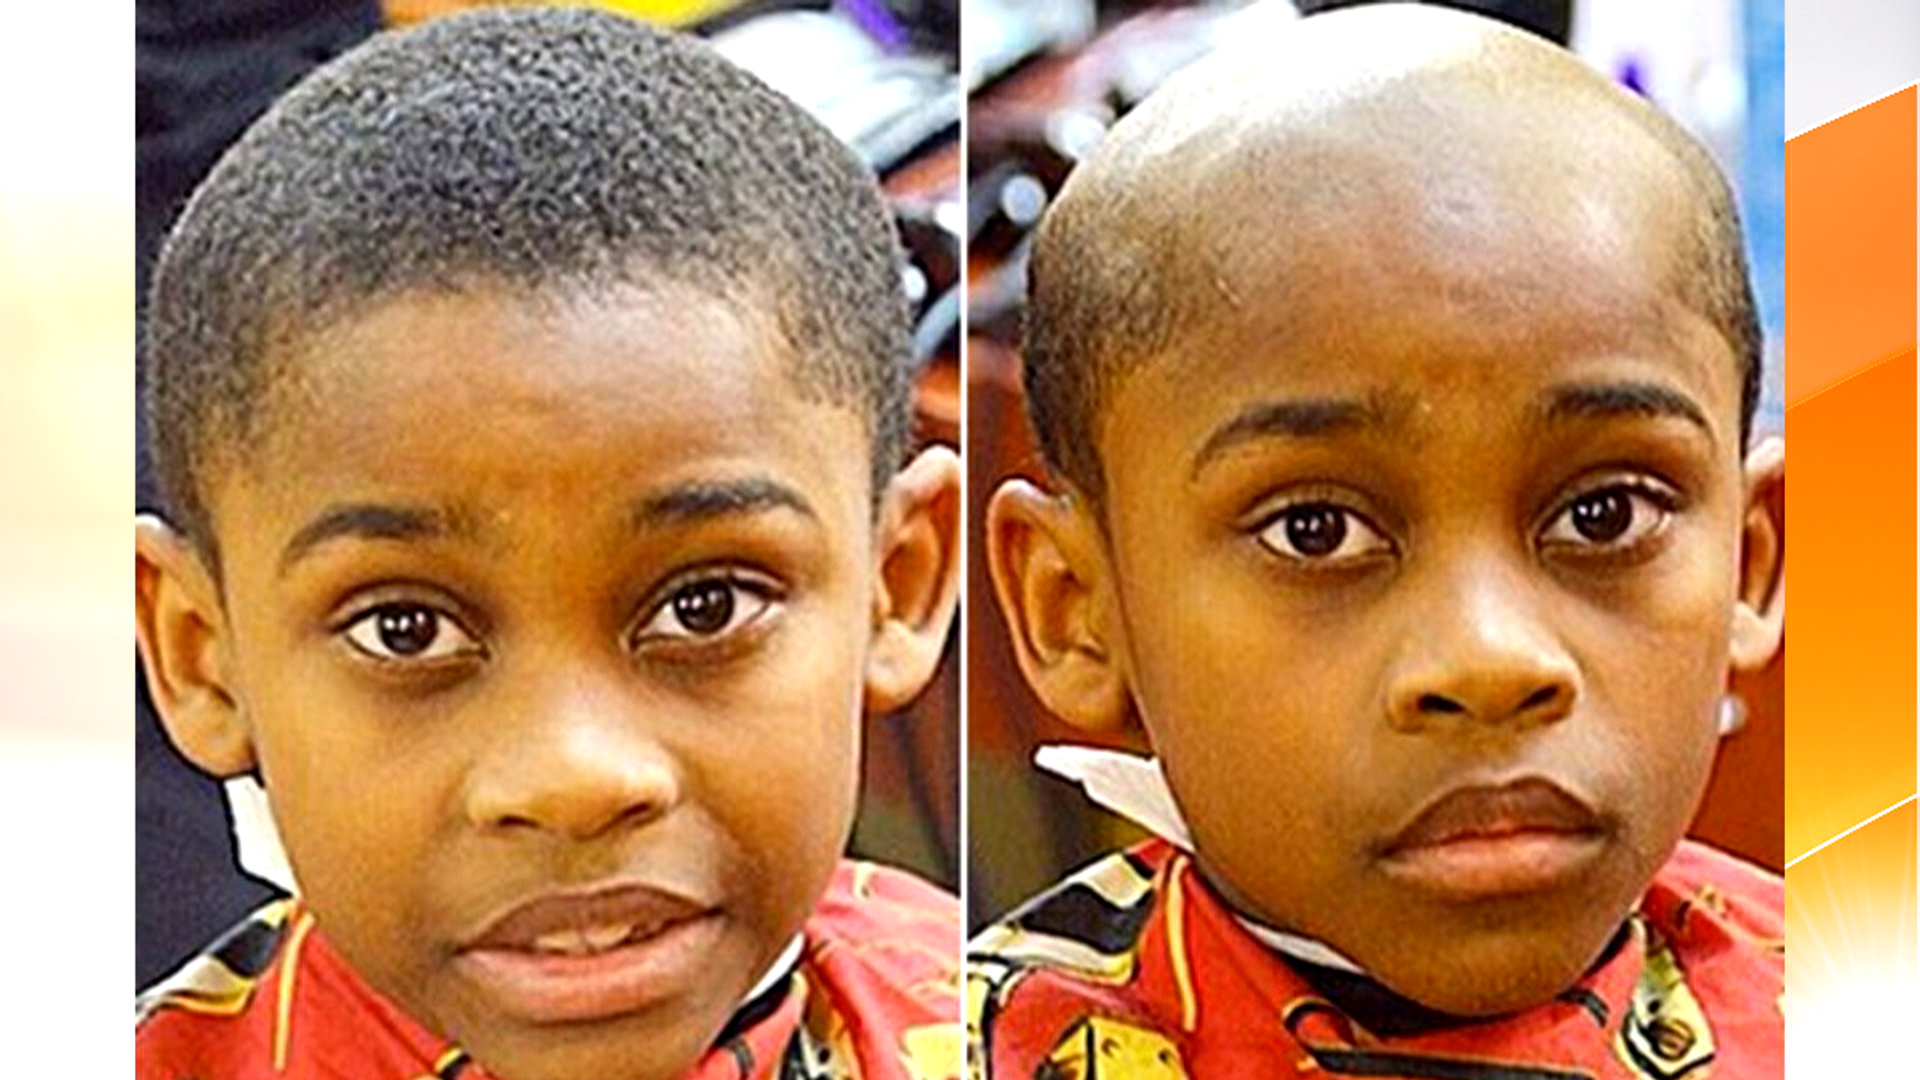 Bad hair day: Barber gives 'Benjamin Button' cuts to misbehaving kids